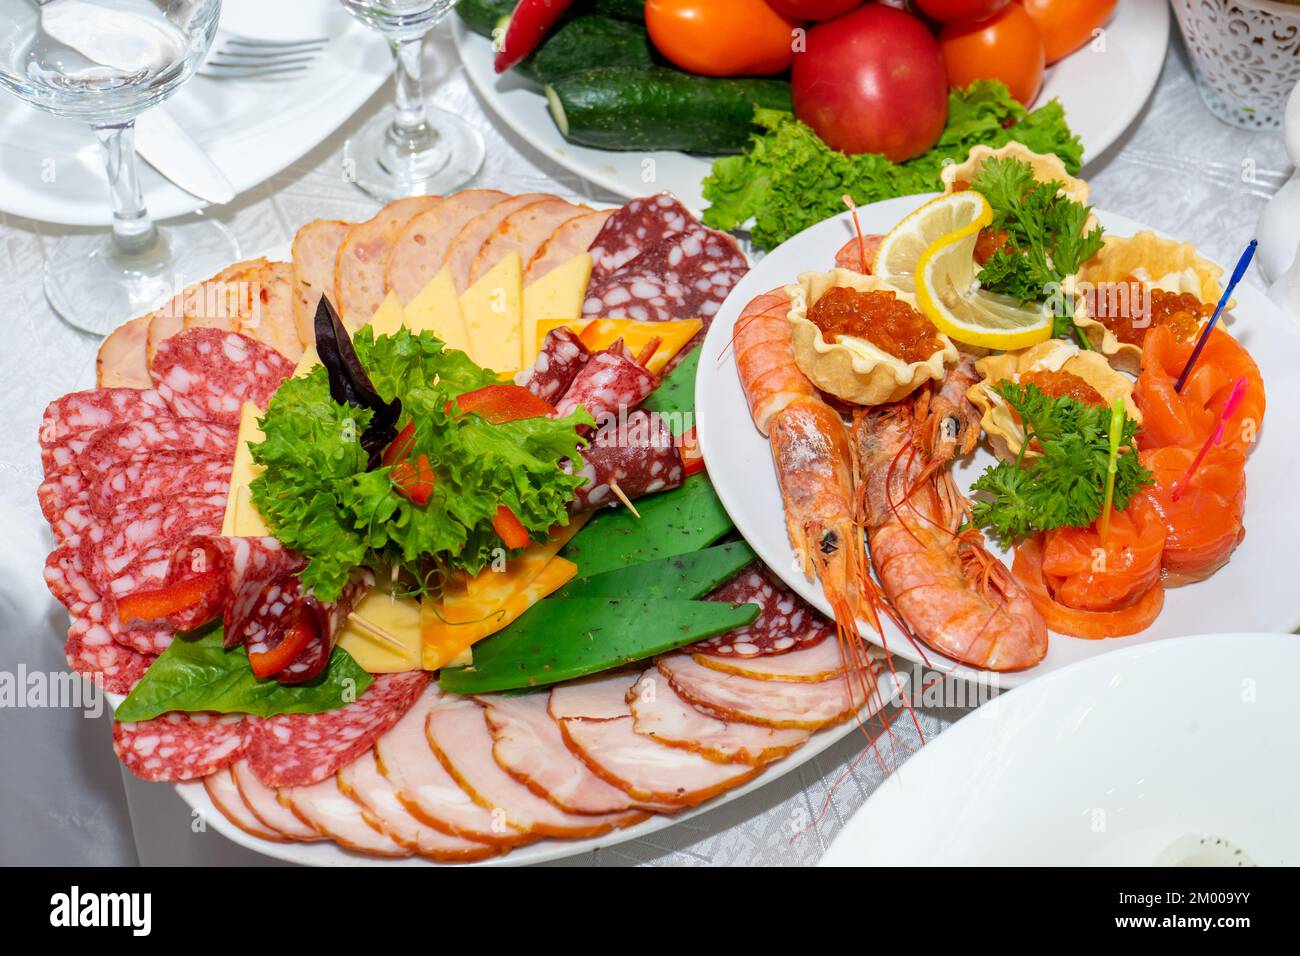 Cut meat and seafood on the festive table. Delicious cold snacks are ready to eat. Stock Photo